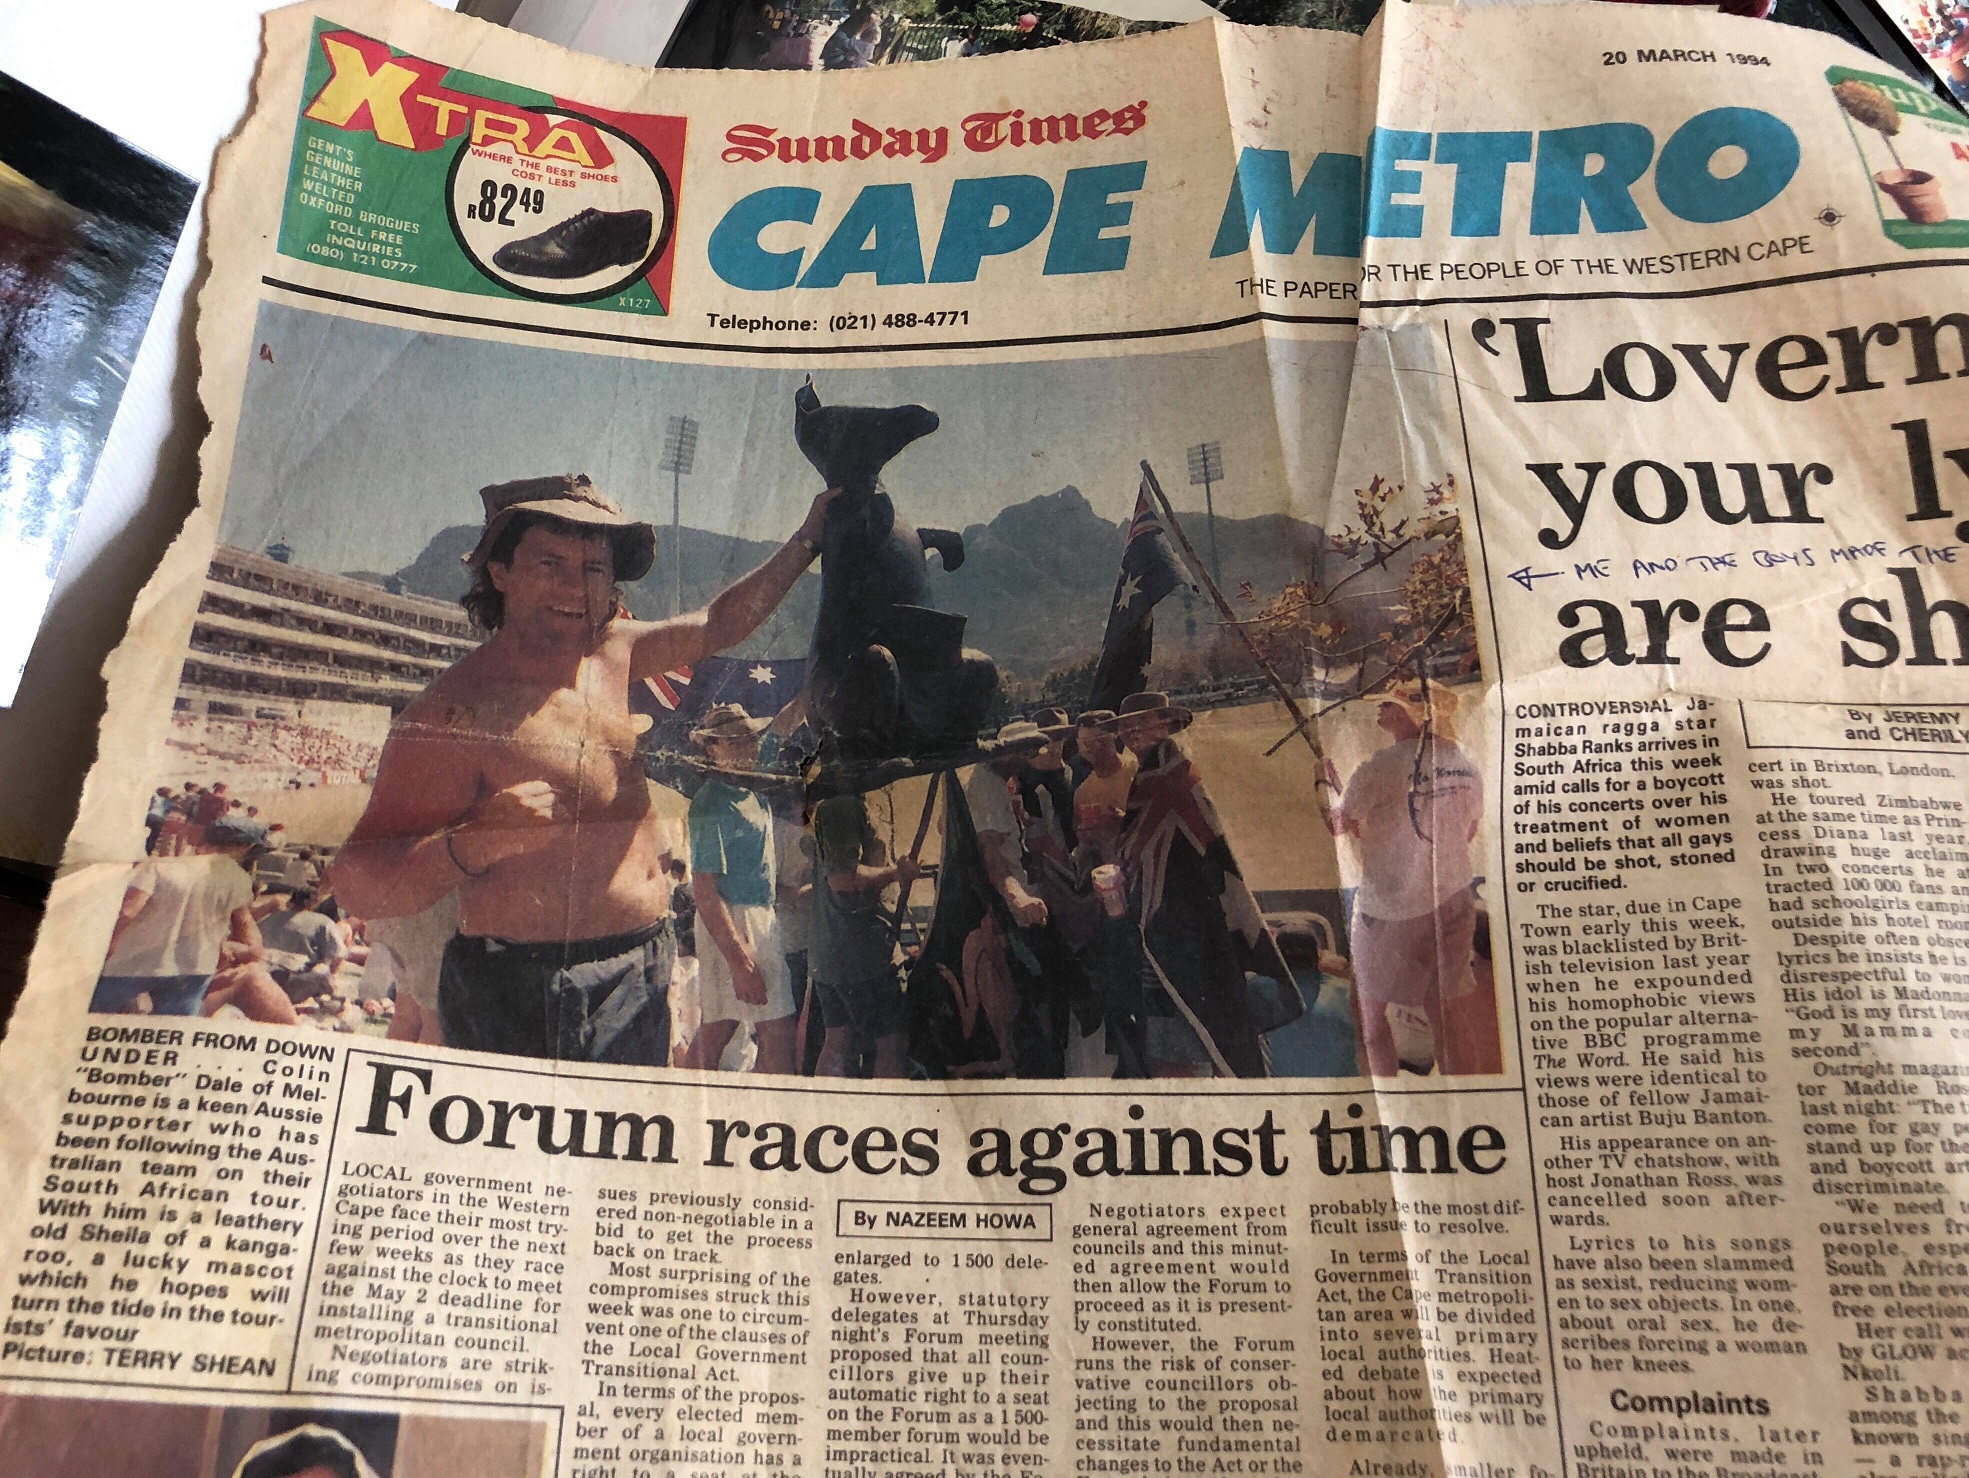 Sportshound Colin Dale made front page news at the South African Test in 1994.